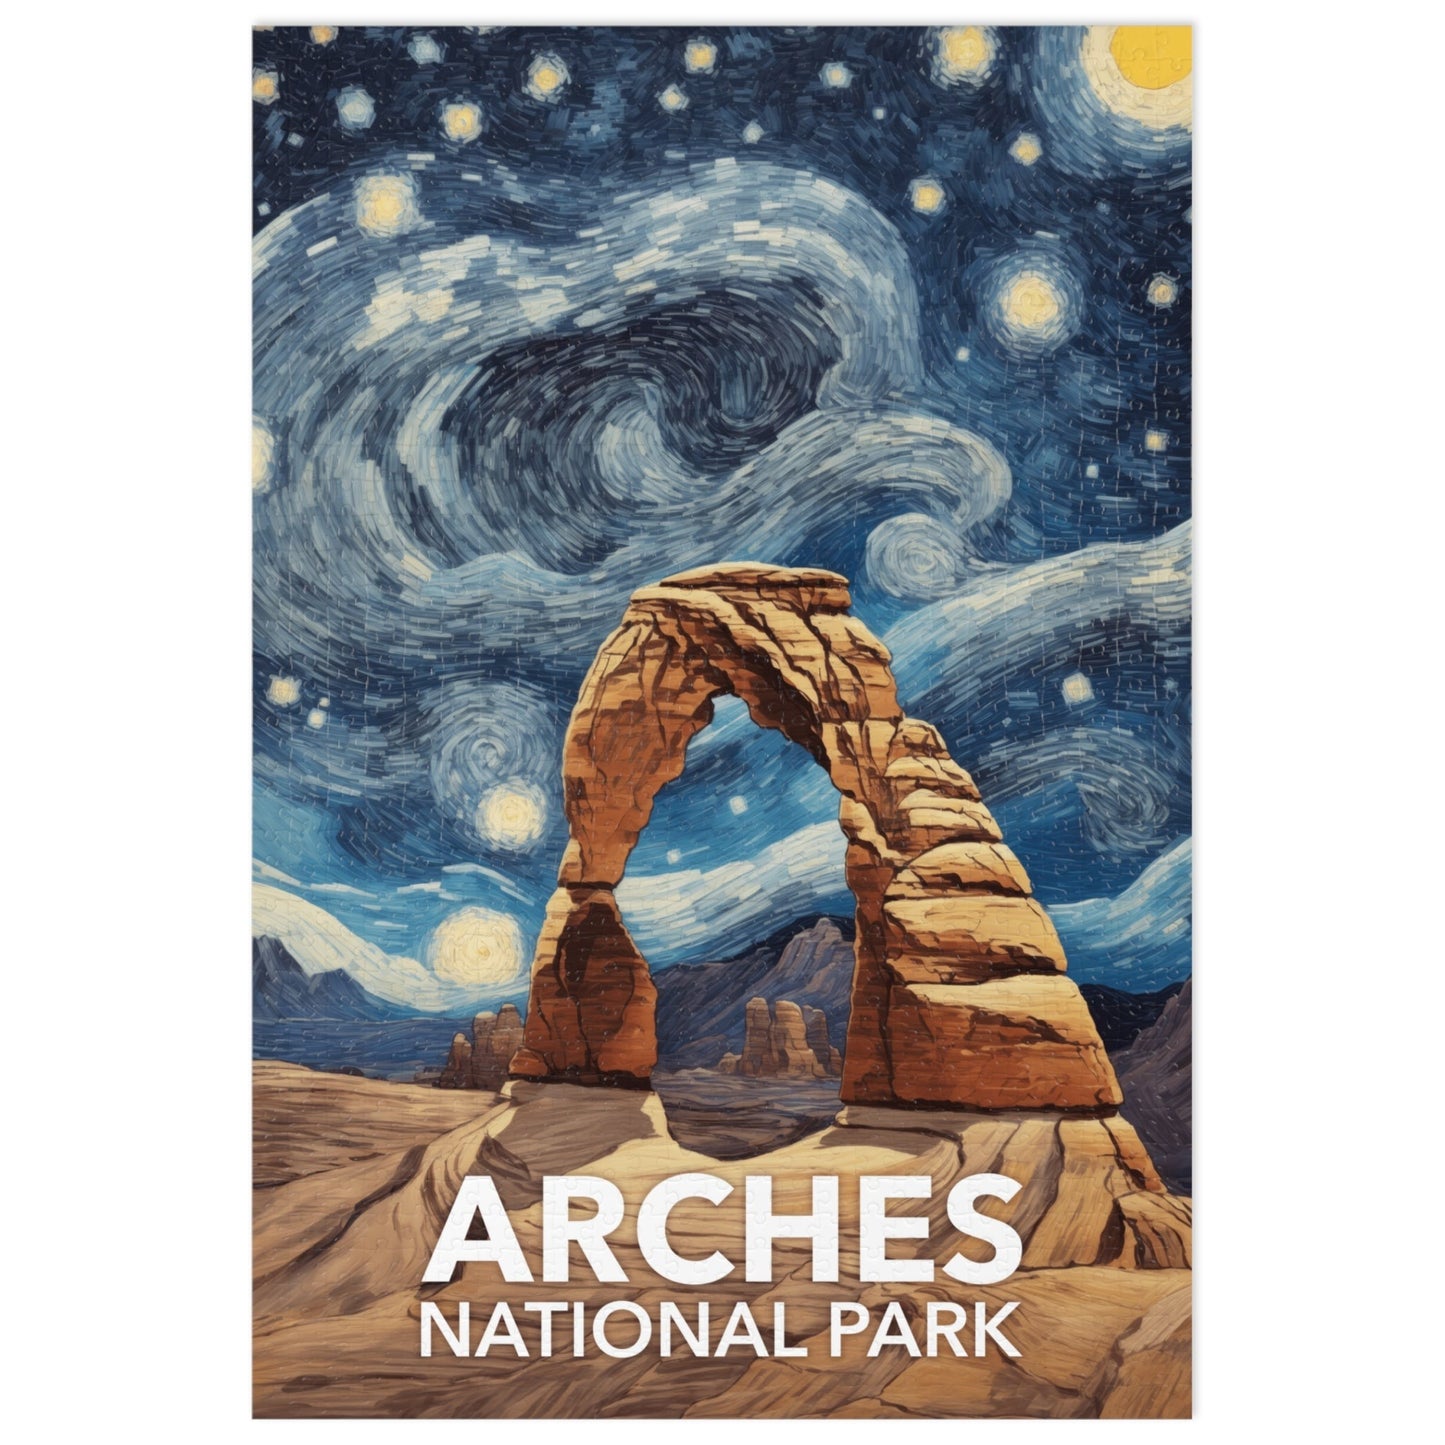 Arches National Park Jigsaw Puzzle 1000 Pieces - The Starry Night